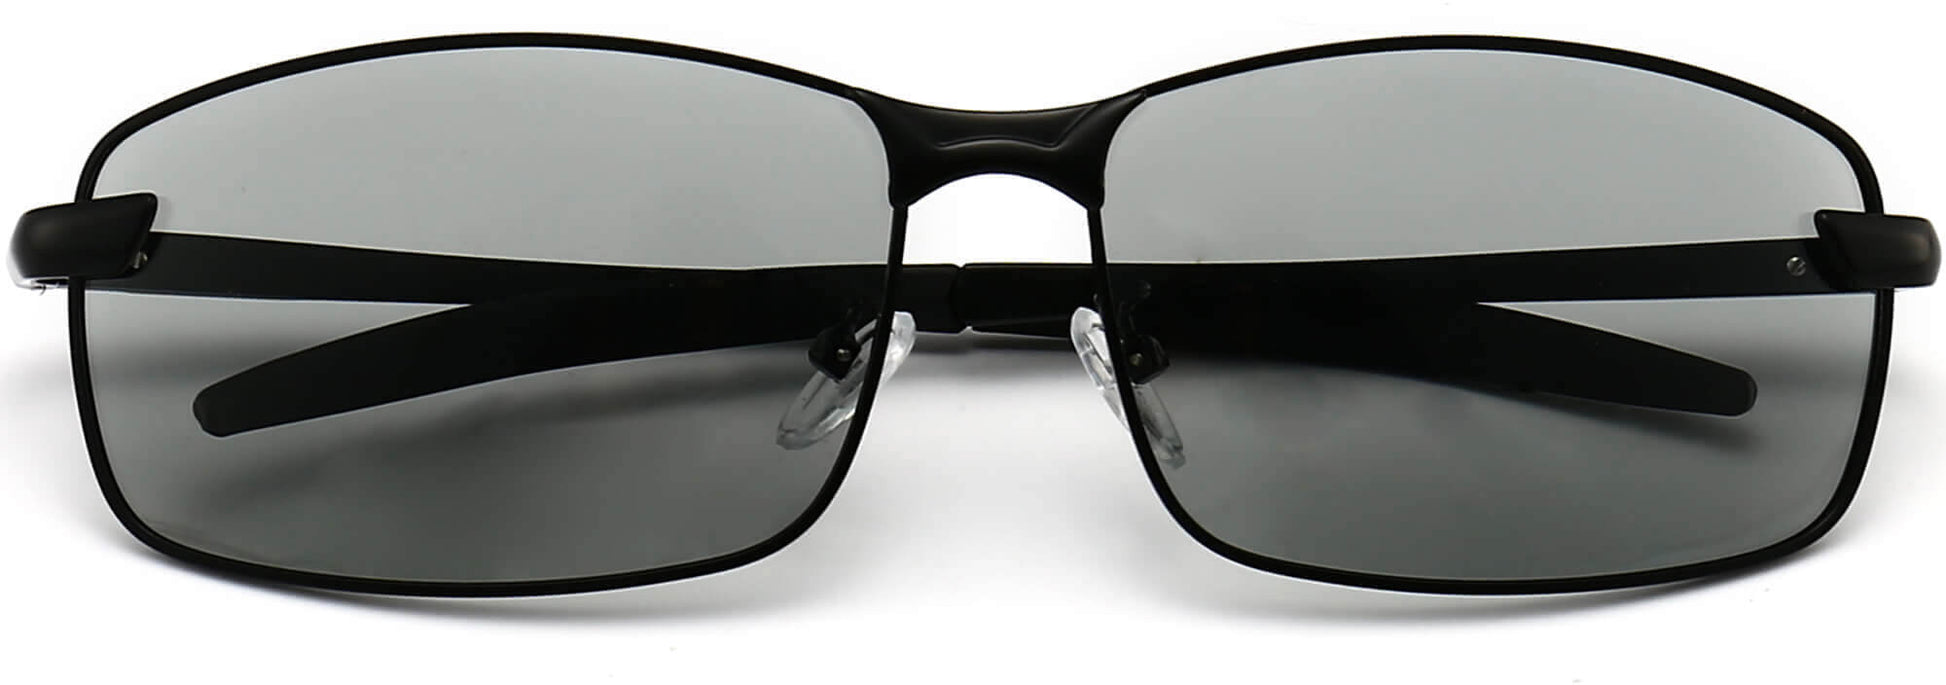 Max Black Stainless steel Sunglasses from ANRRI